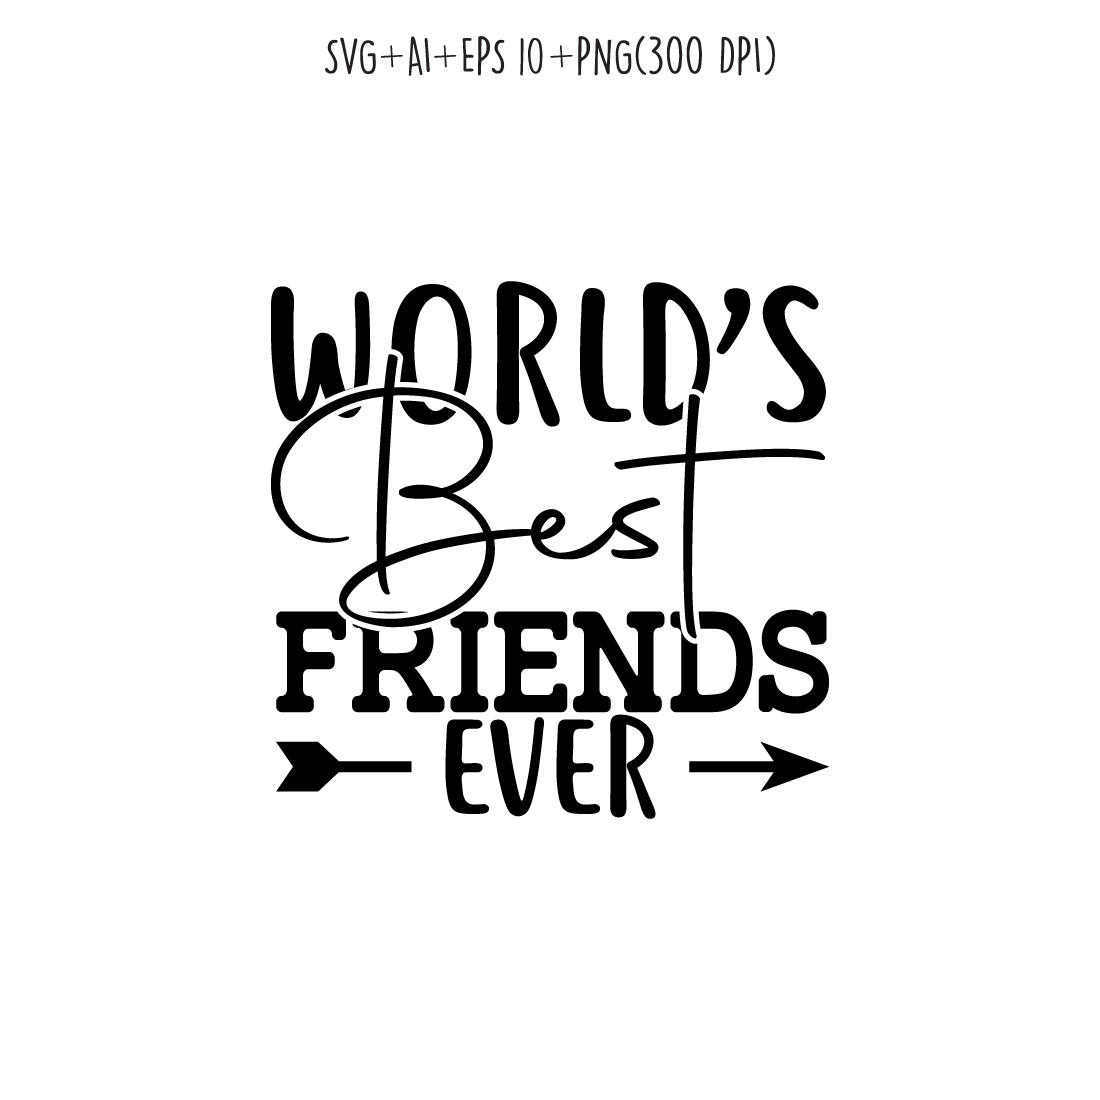 world’s best friends ever SVG design for t-shirts, cards, frame artwork, phone cases, bags, mugs, stickers, tumblers, print, etc preview image.